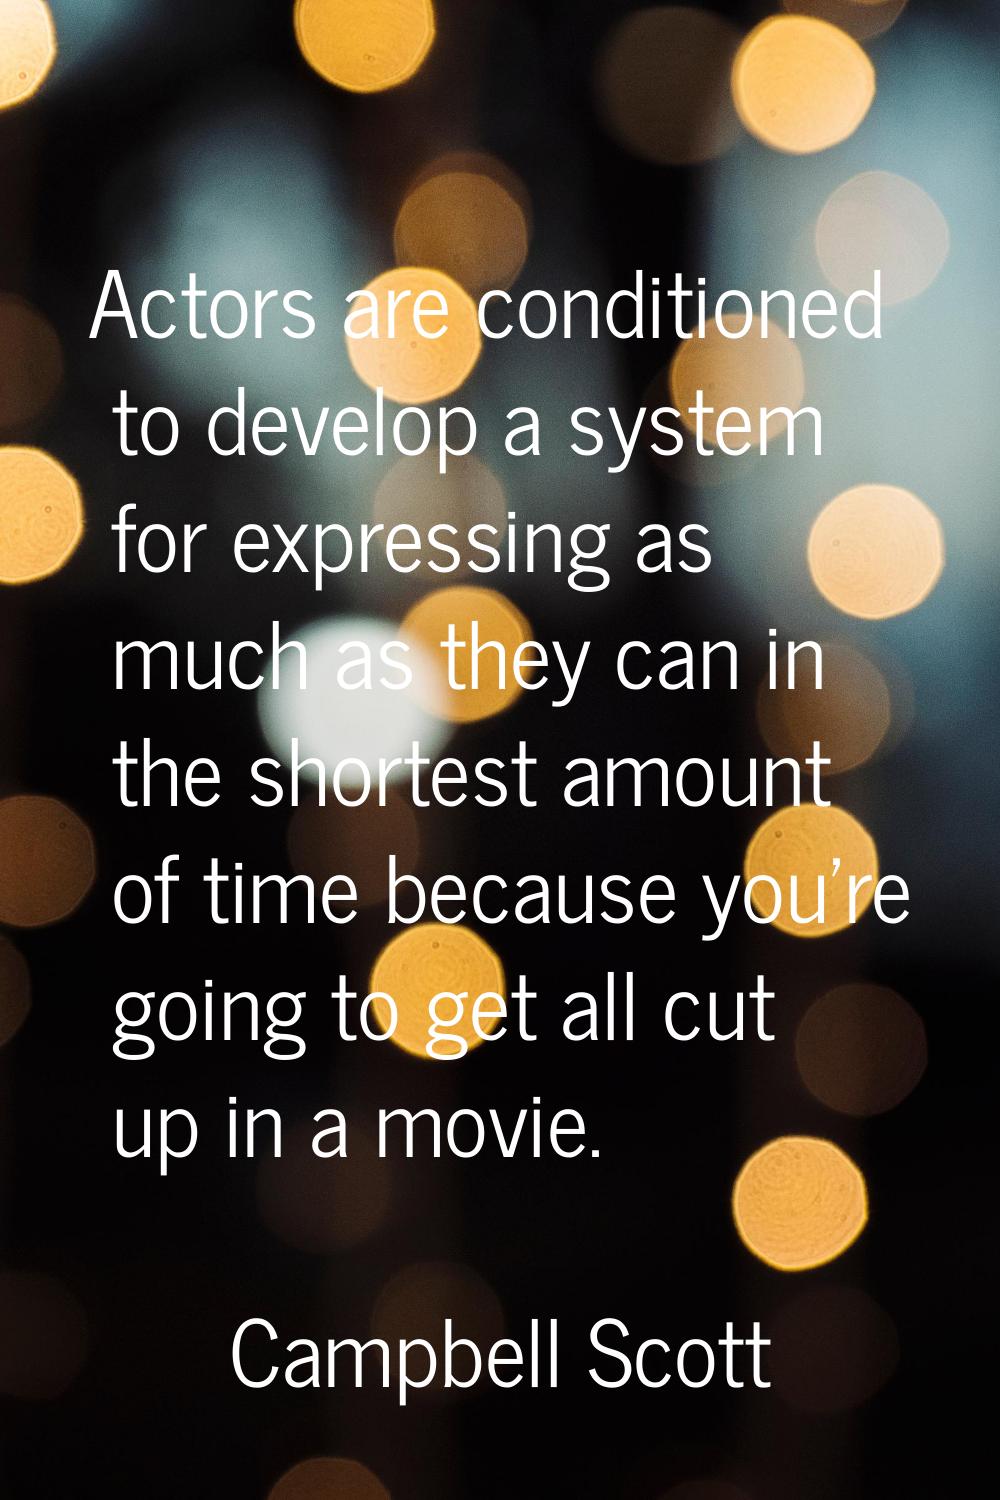 Actors are conditioned to develop a system for expressing as much as they can in the shortest amoun